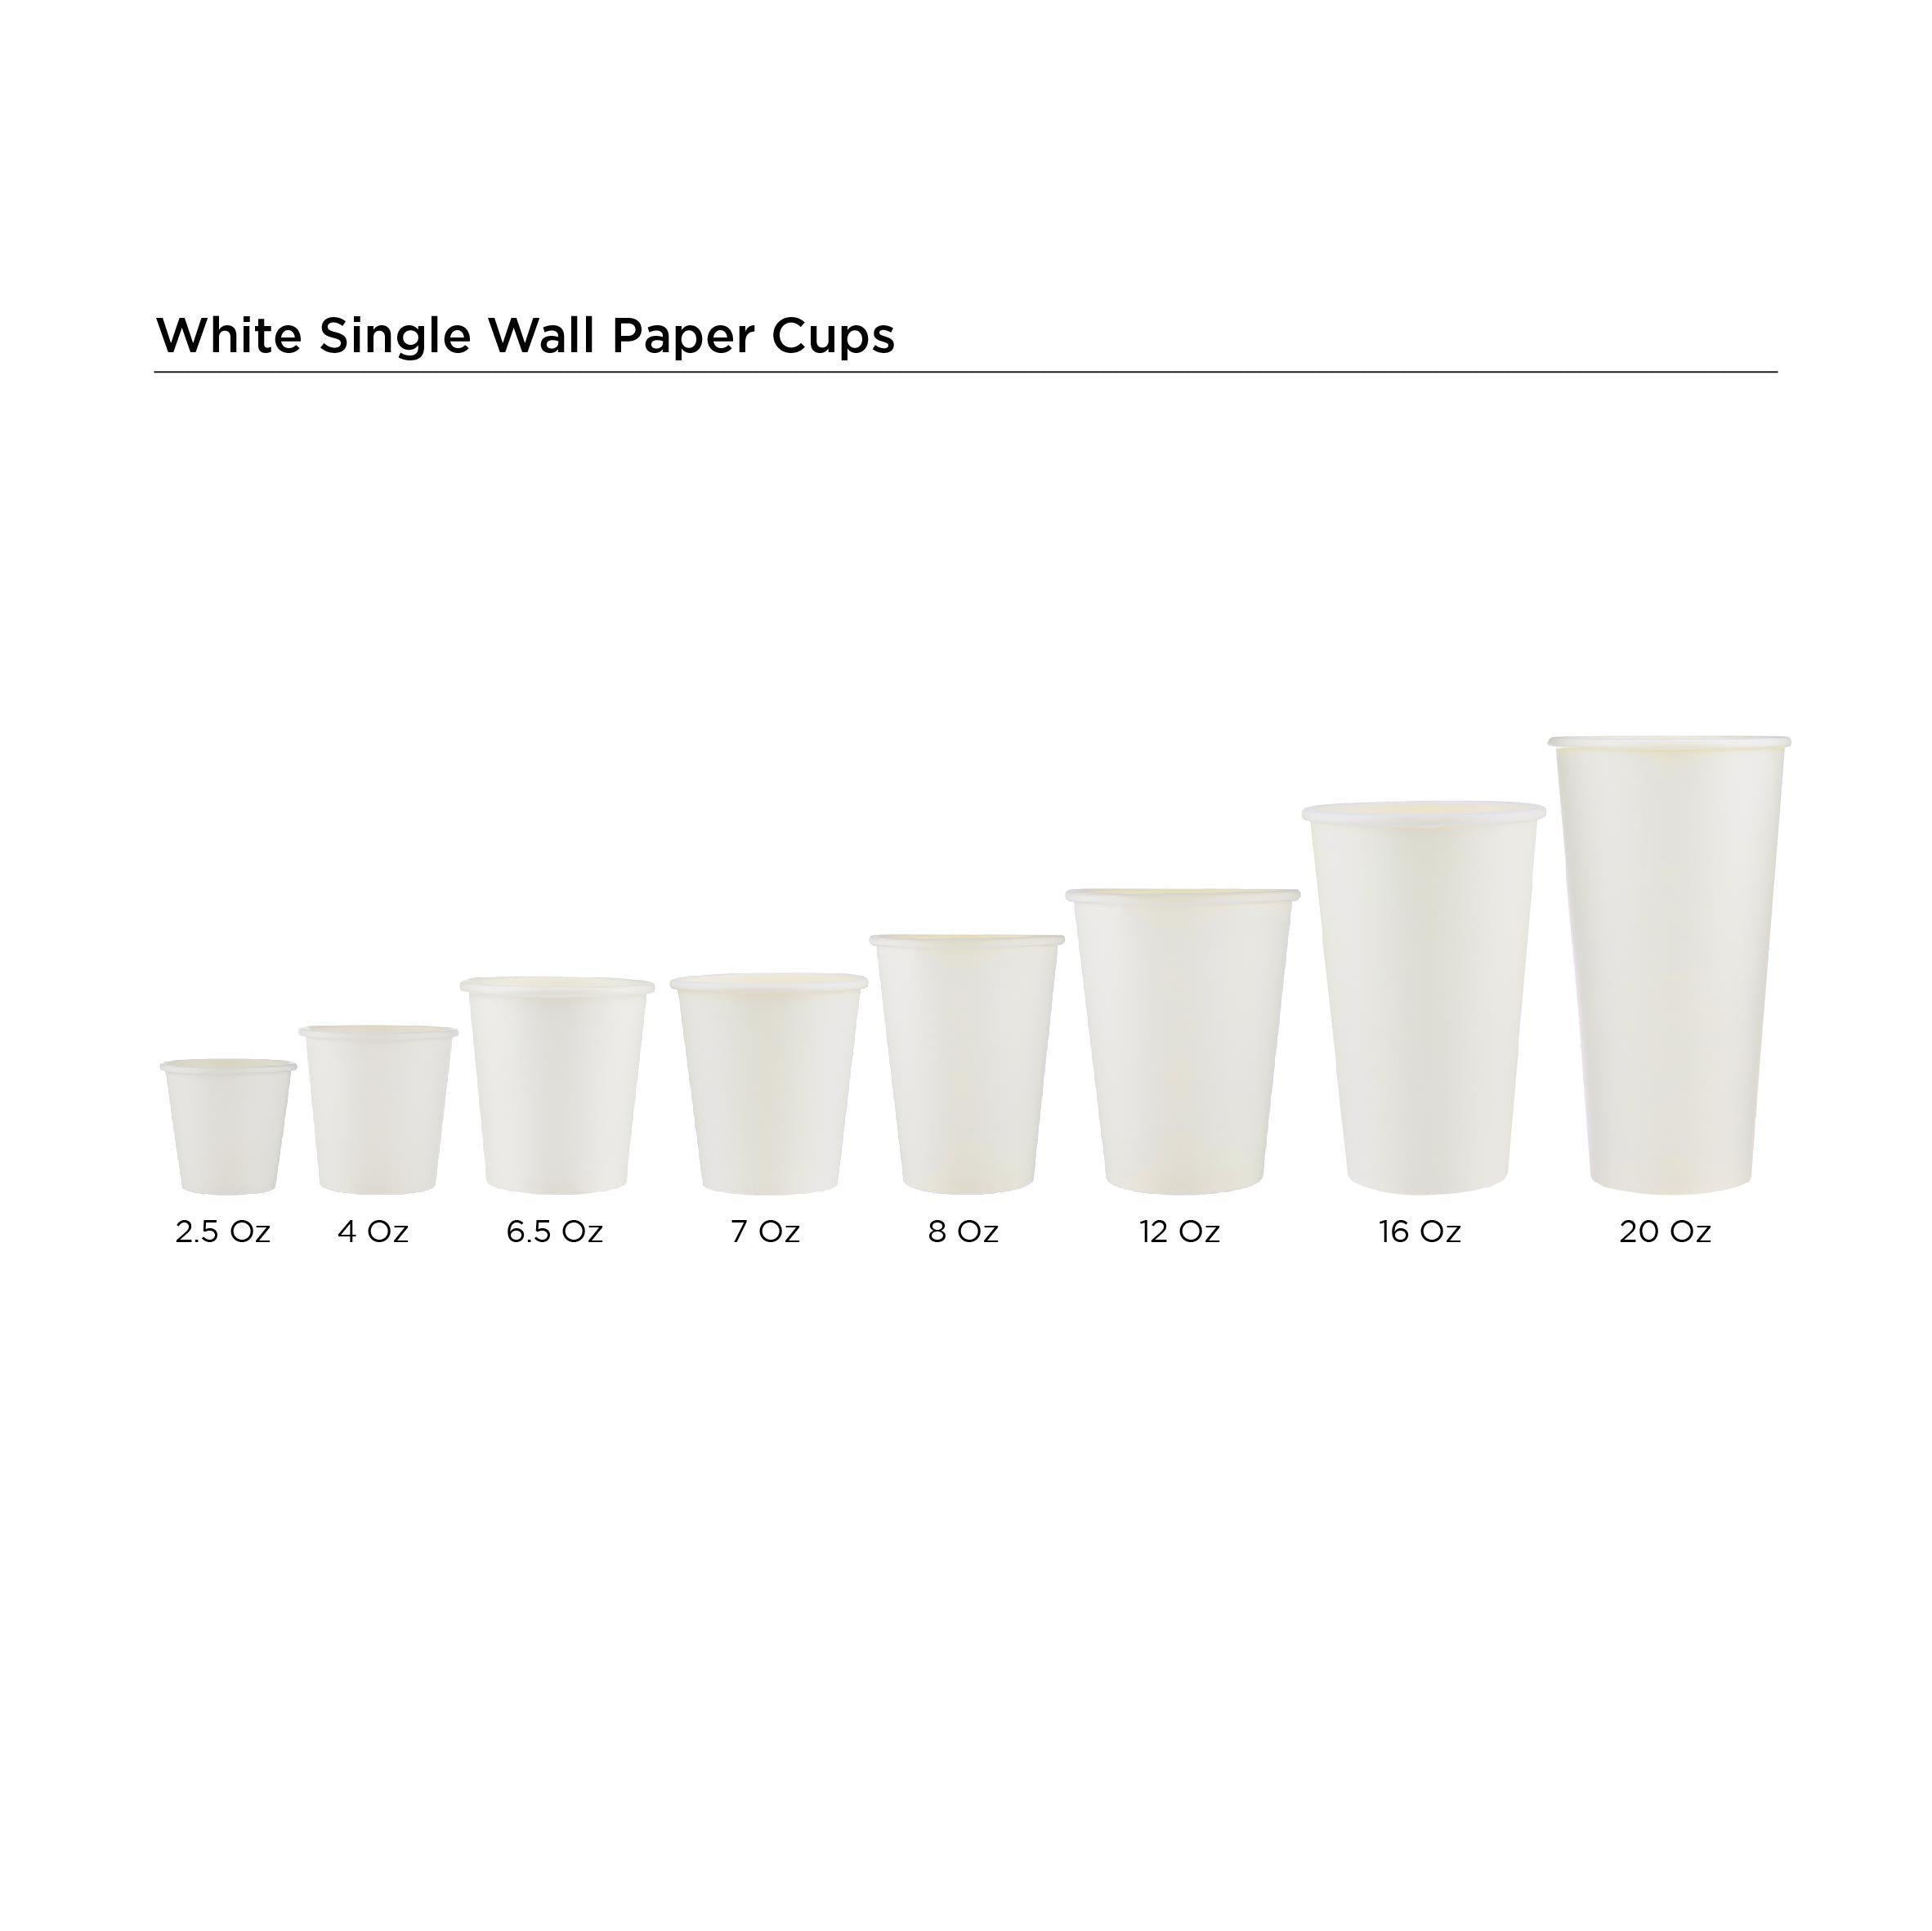 Hotpack Global - White single wall paper cup for export and wholesale